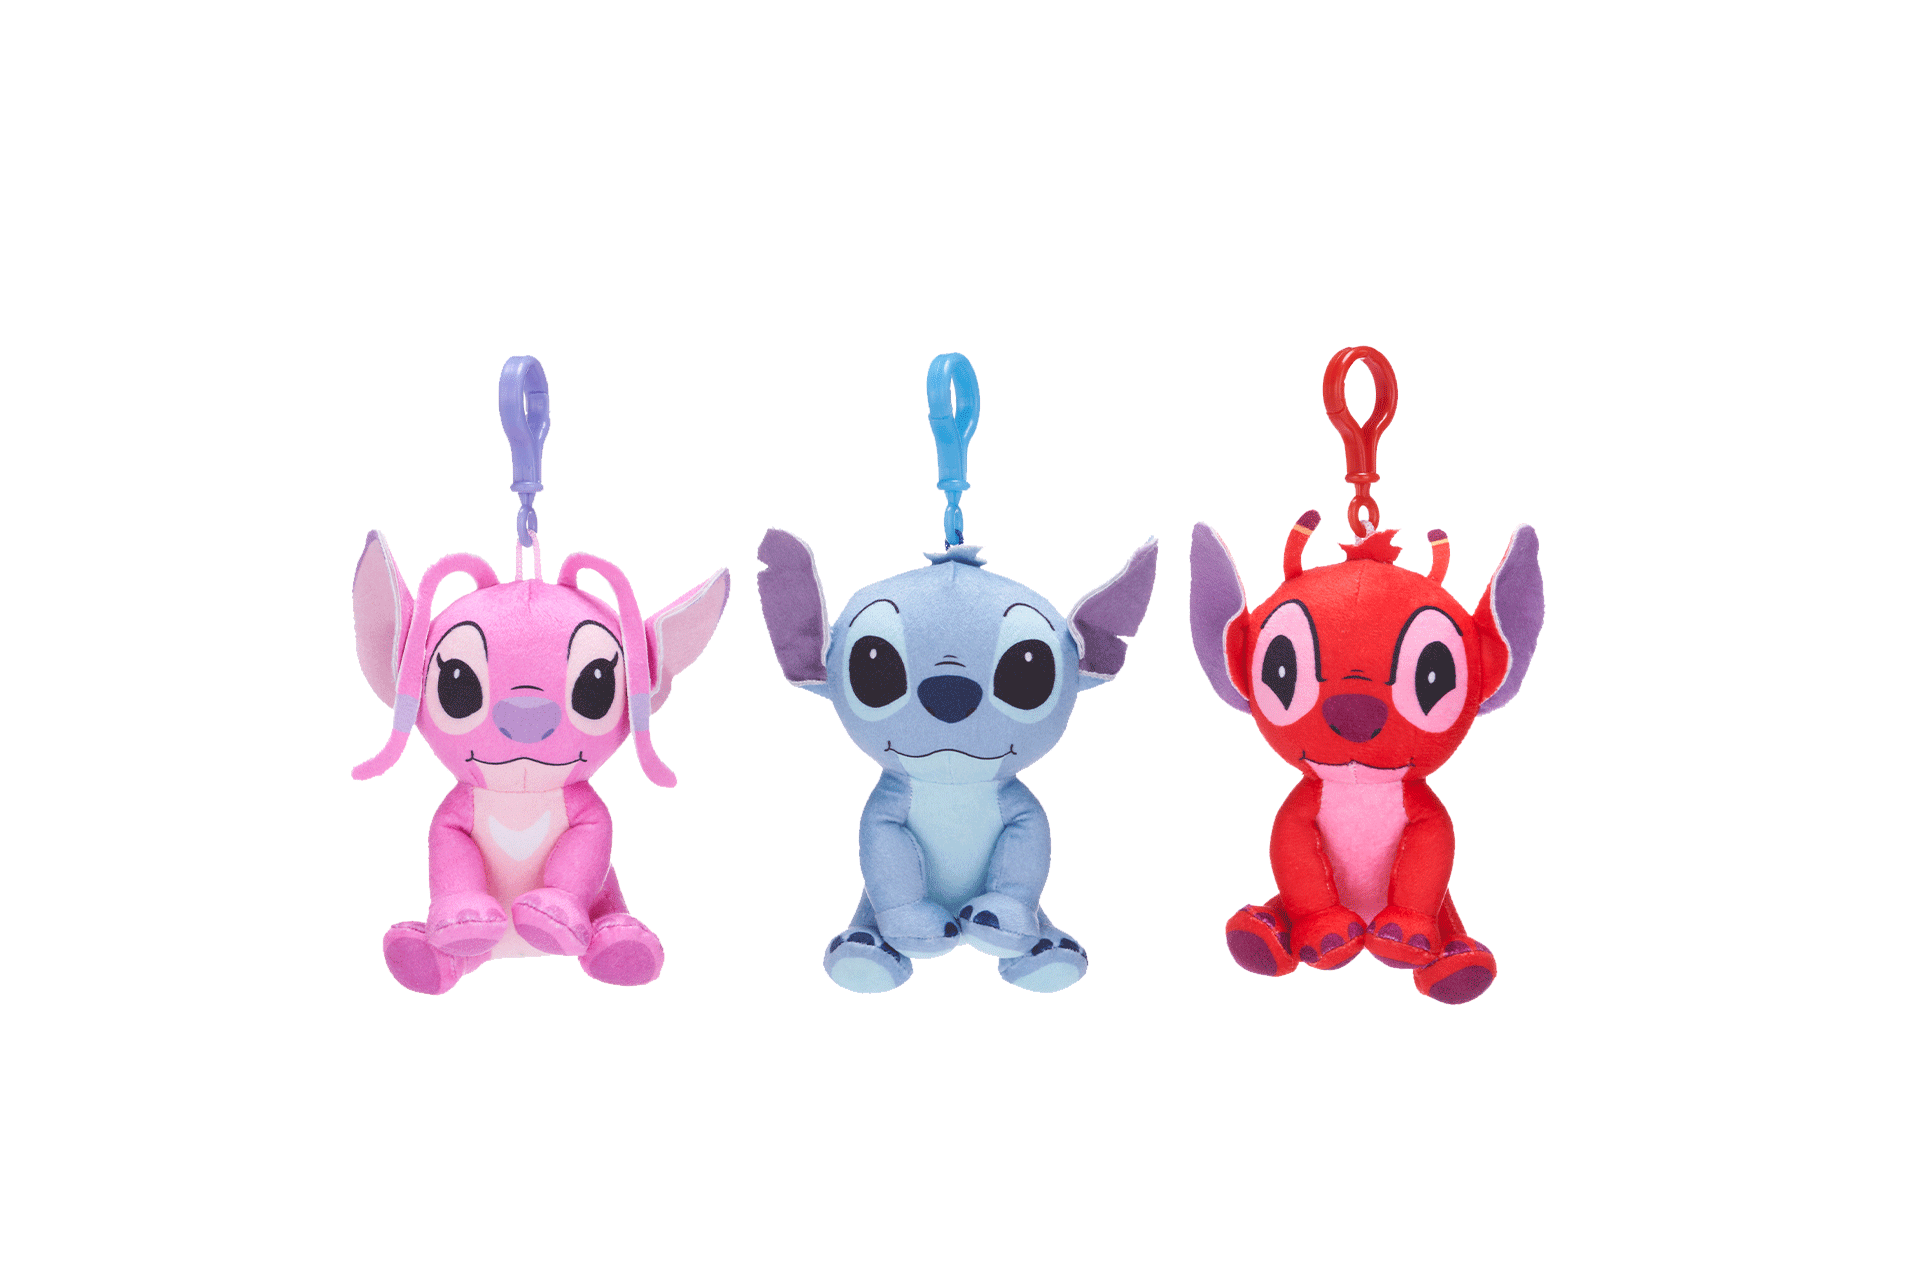 23.03.26.1 Peluche Stitch rouge Lilo 27cm Disney sonore play by play leroy